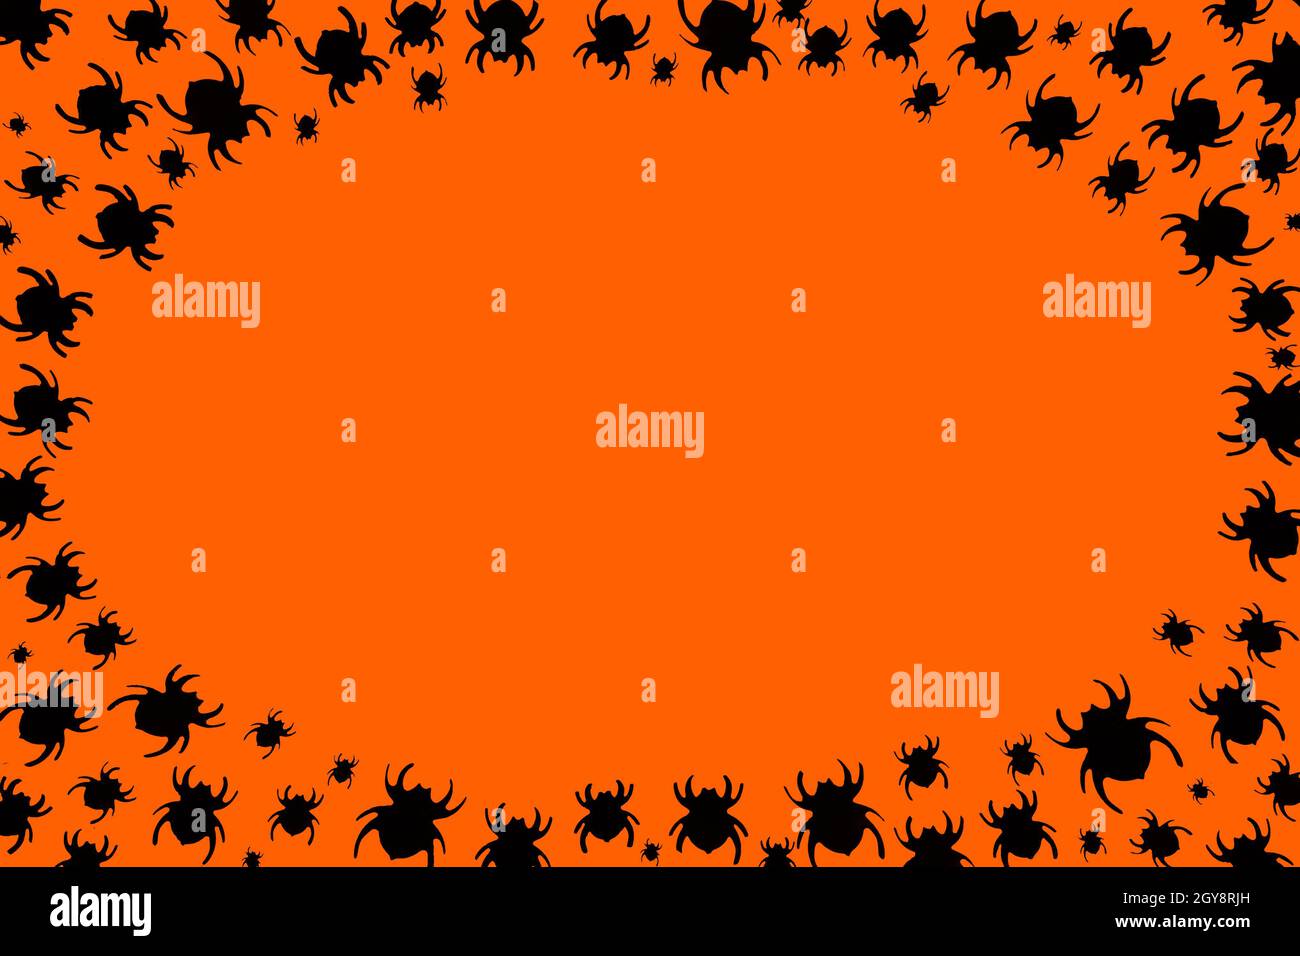 Scary orange background for Halloween. Black spiders running to the center surround. Place for the text in the center. Frame for holiday design. Stock Photo